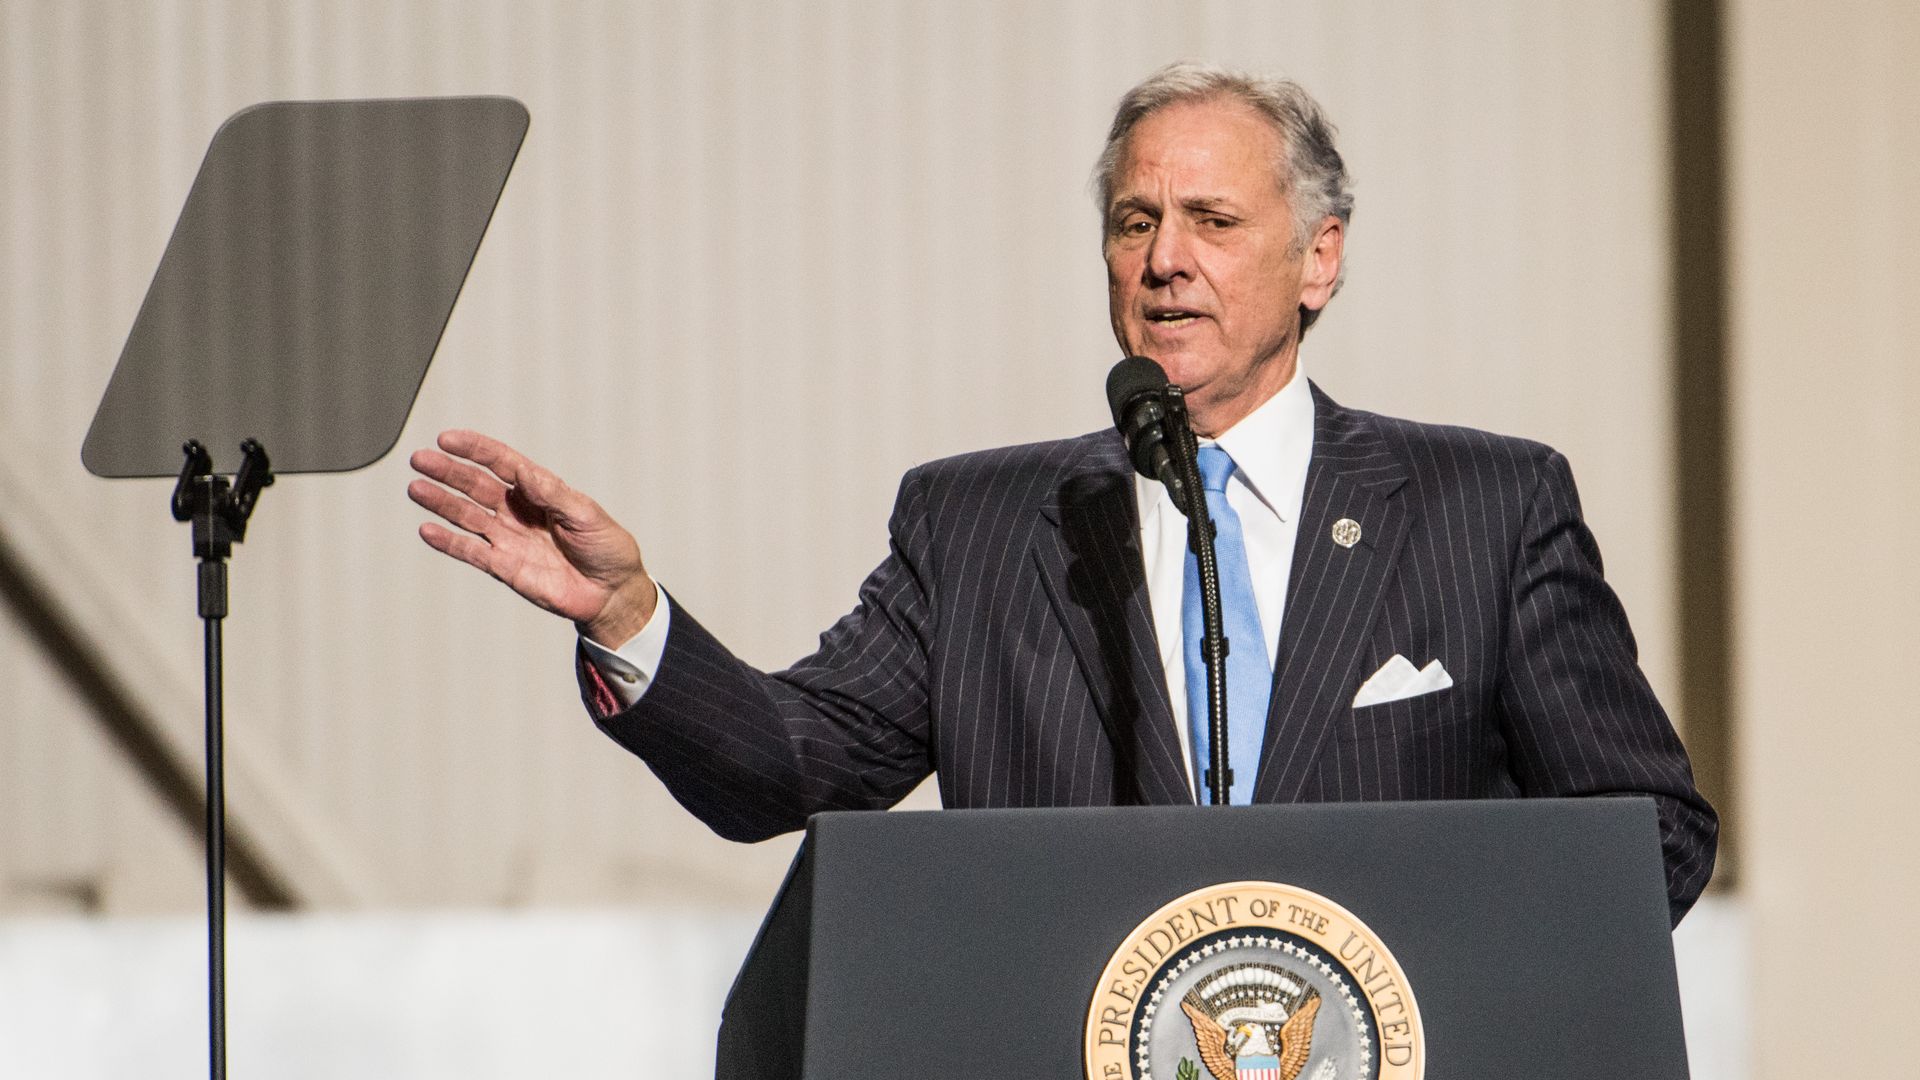 Photo of Henry McMaster speaking from a podium while waving his right hand in the air